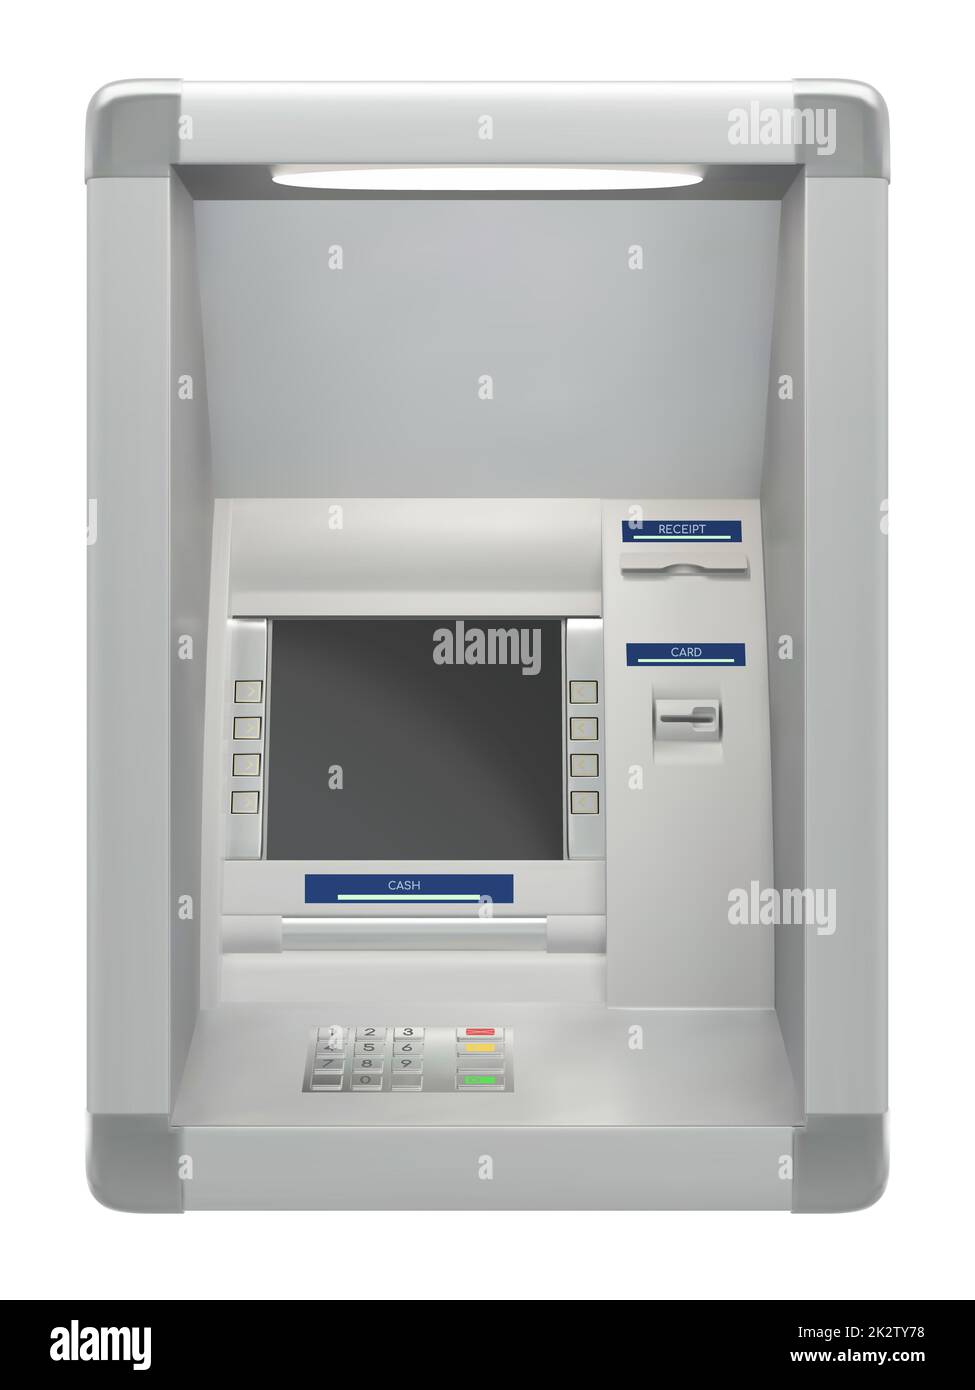 Atm machine on wall isolated on white background Stock Photo